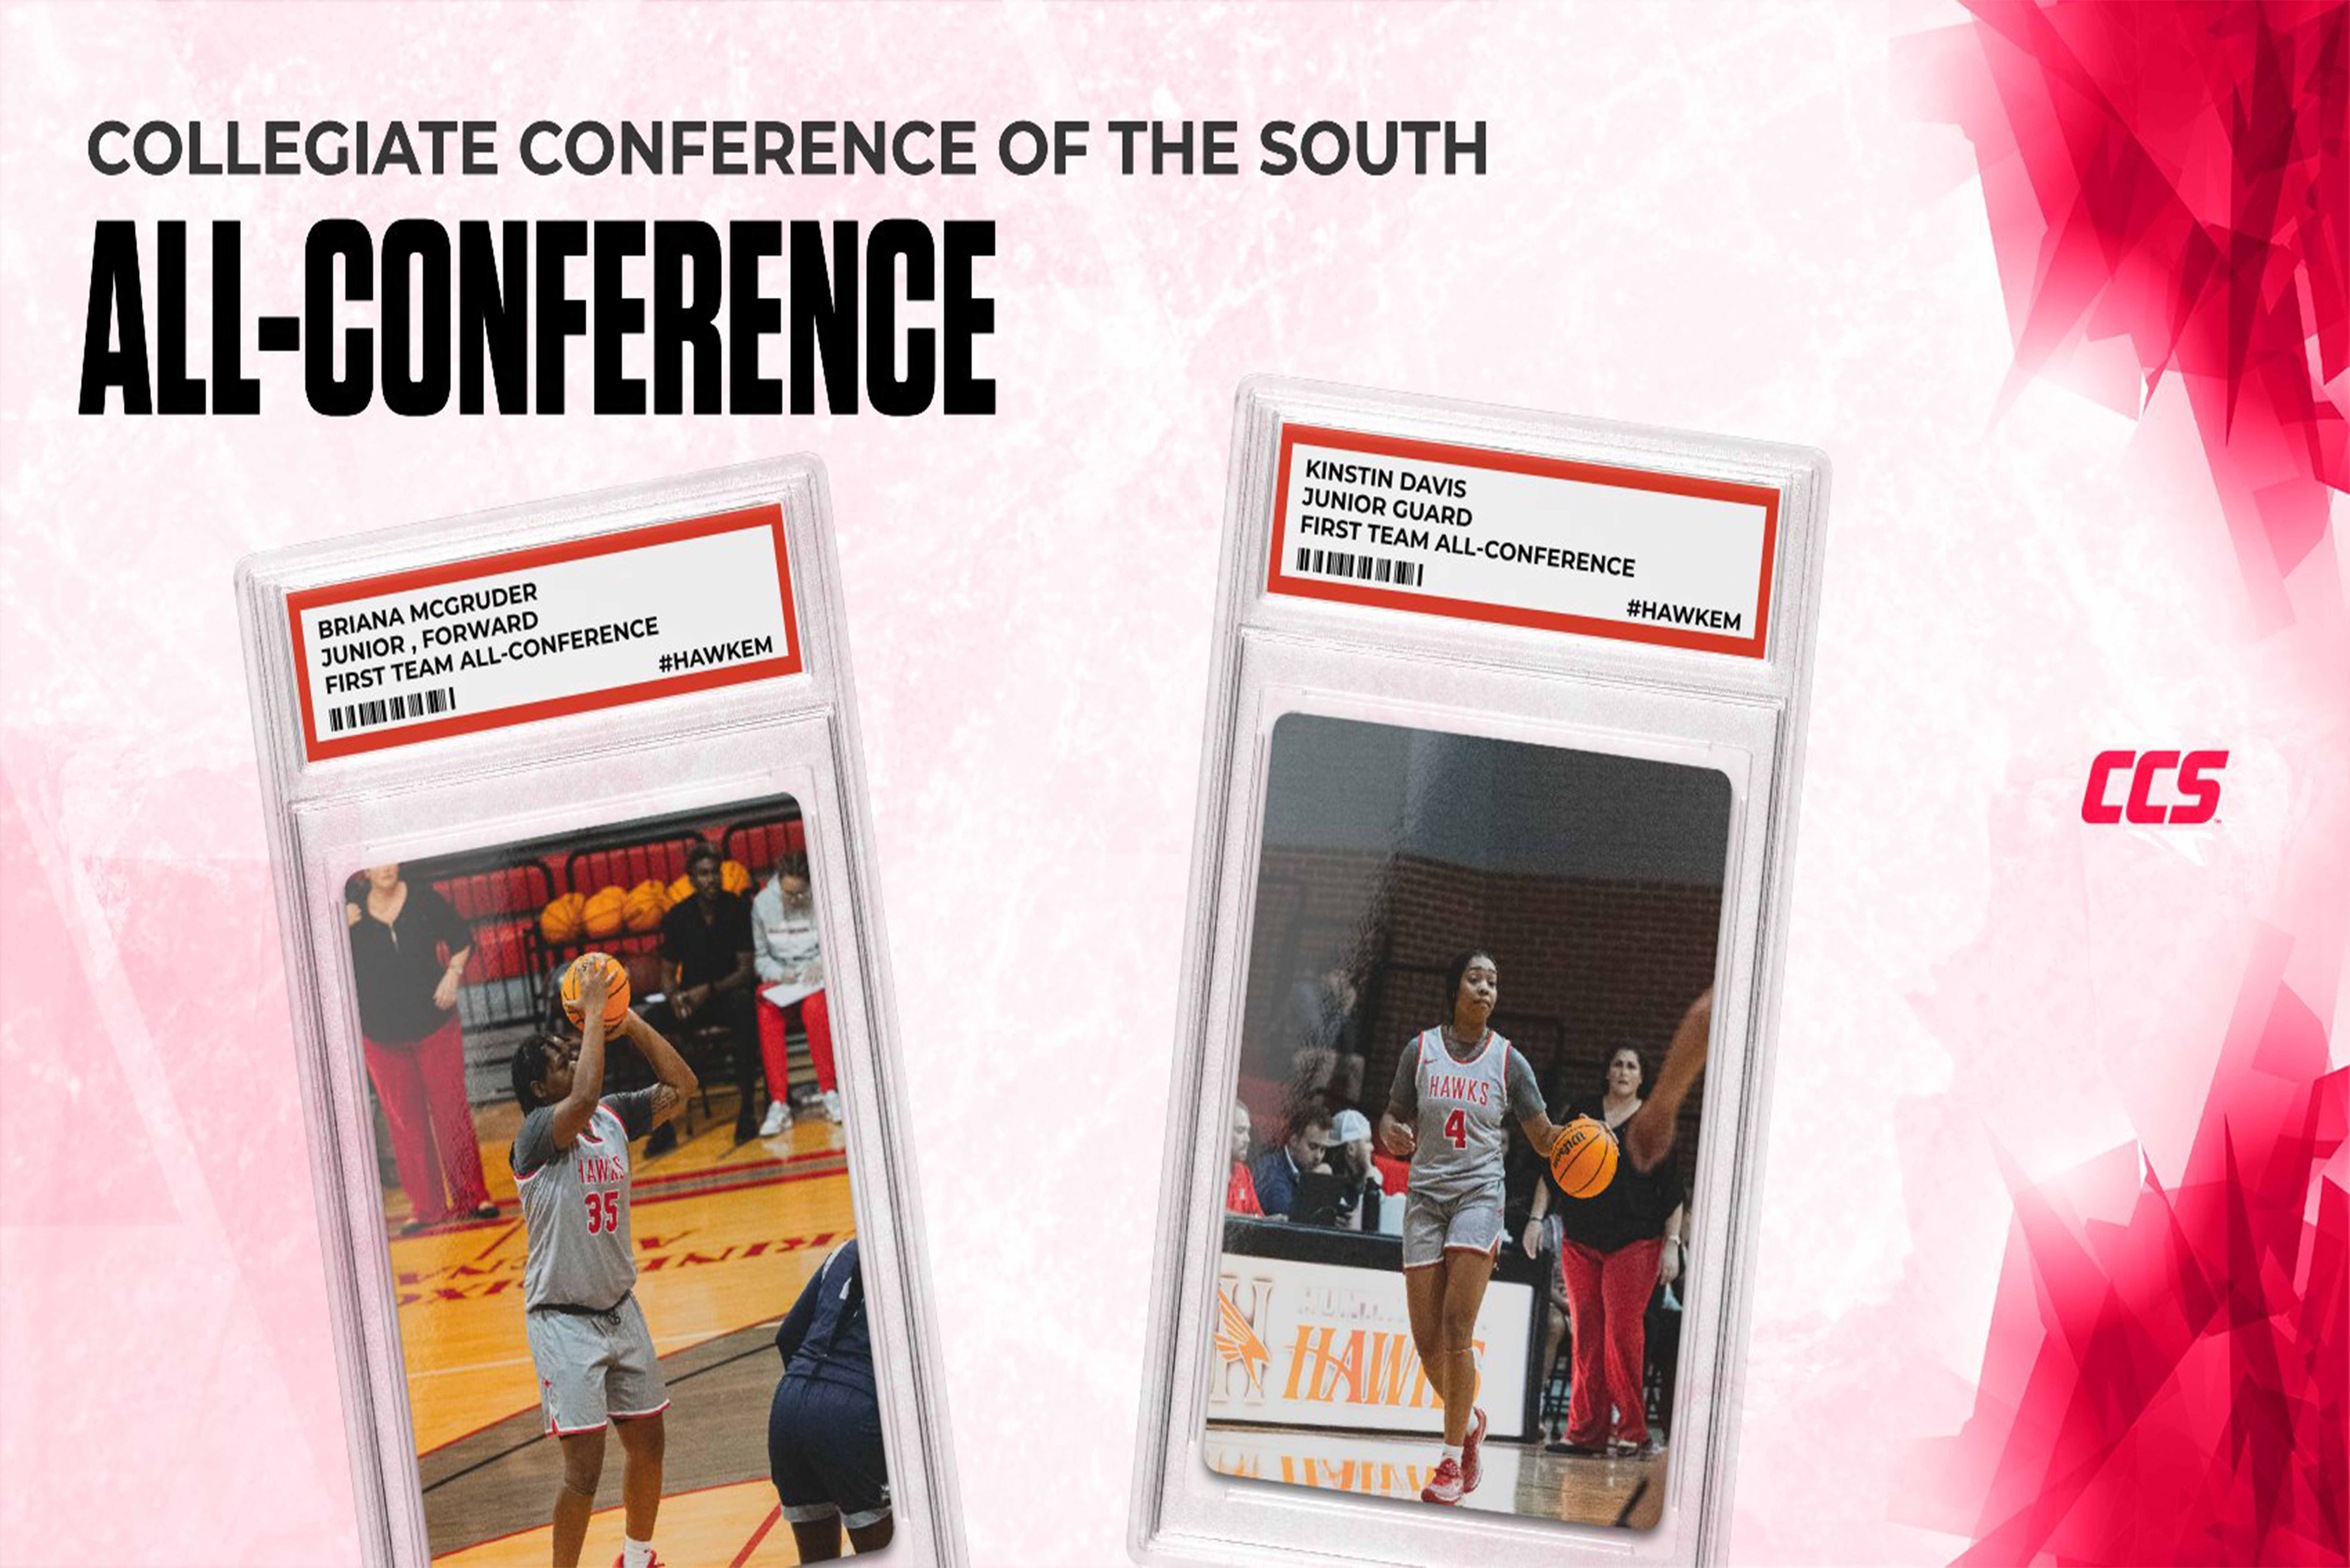 Davis and McGruder named to CCS All-Conference First Team